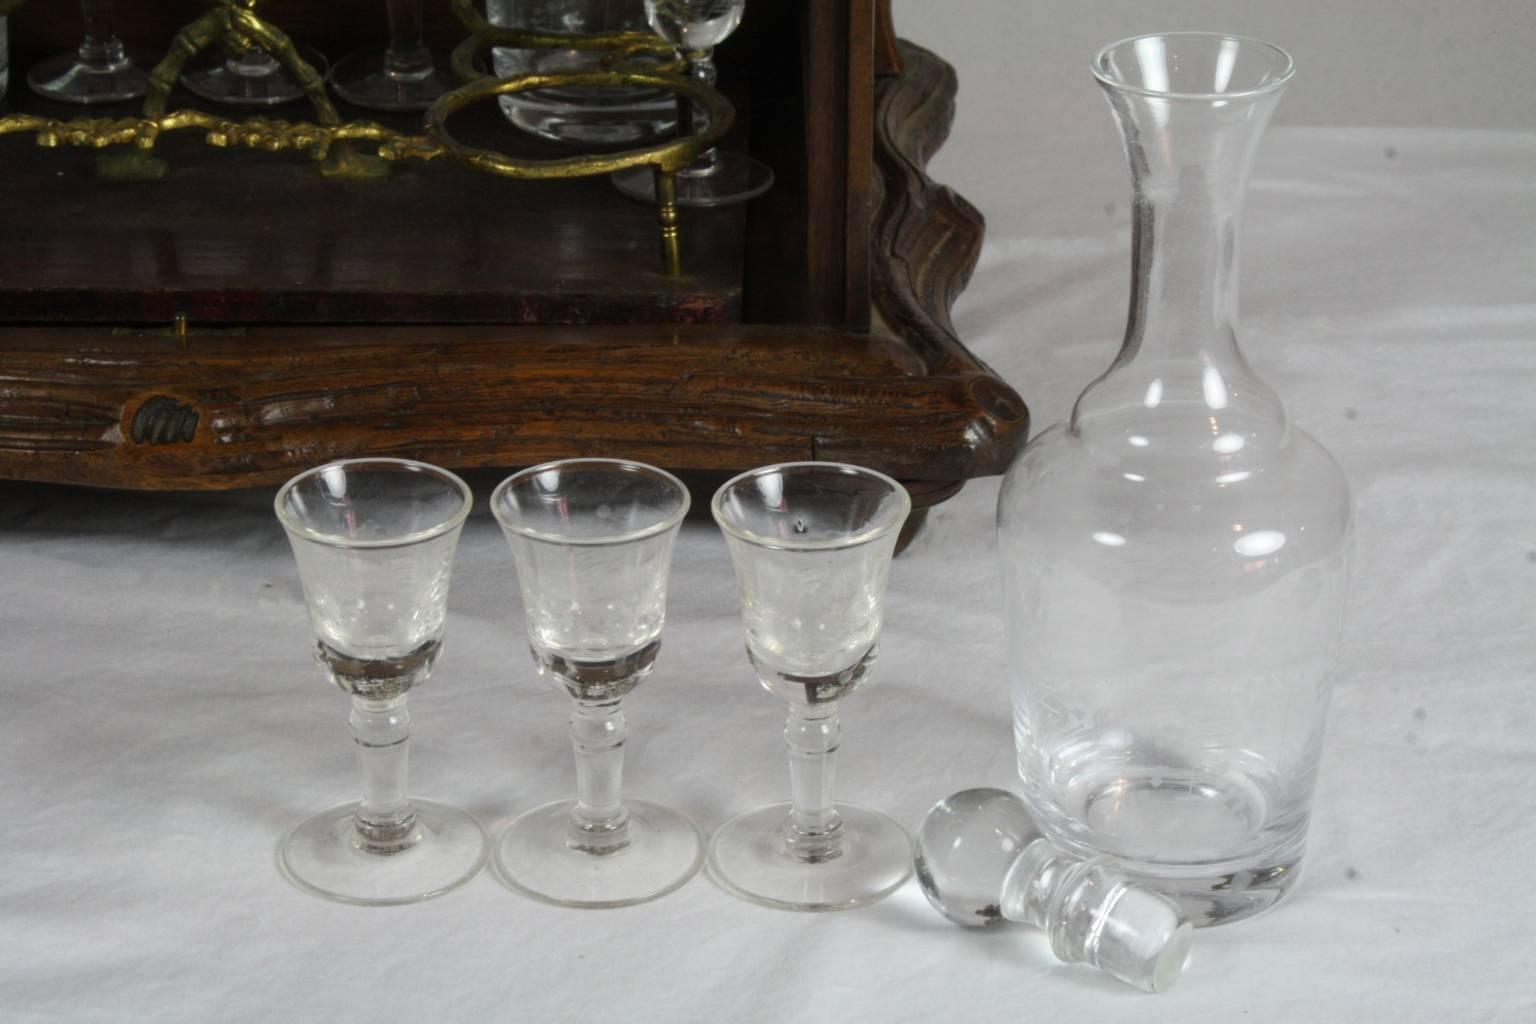 Swiss Walnut Liquor Box with Four Decanters and 16 Cordial/Aperitif Glasses For Sale 1